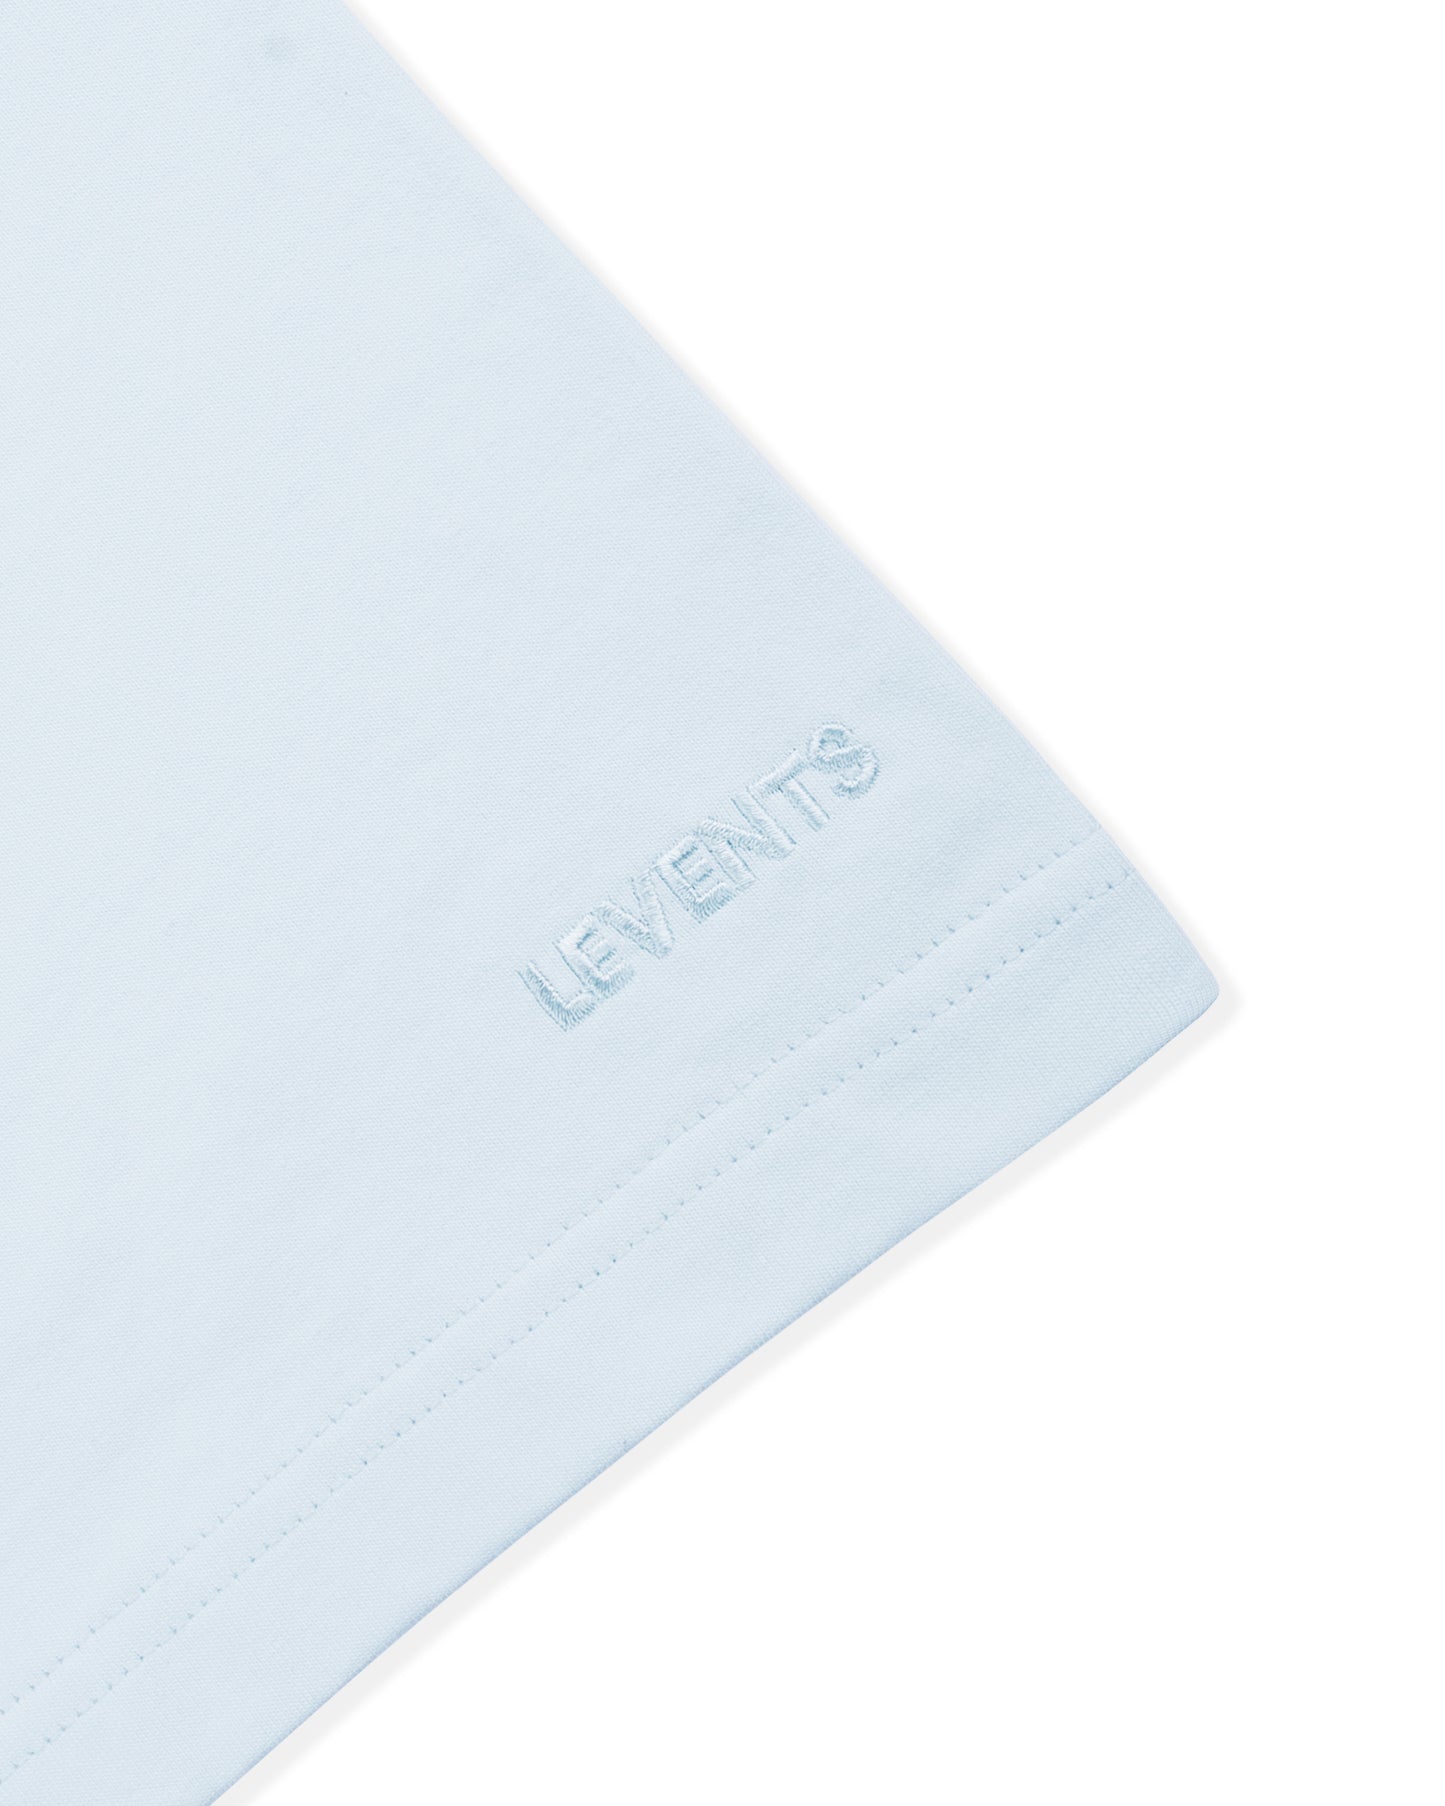 Levents® Blank Oversized Tee/ Baby Blue